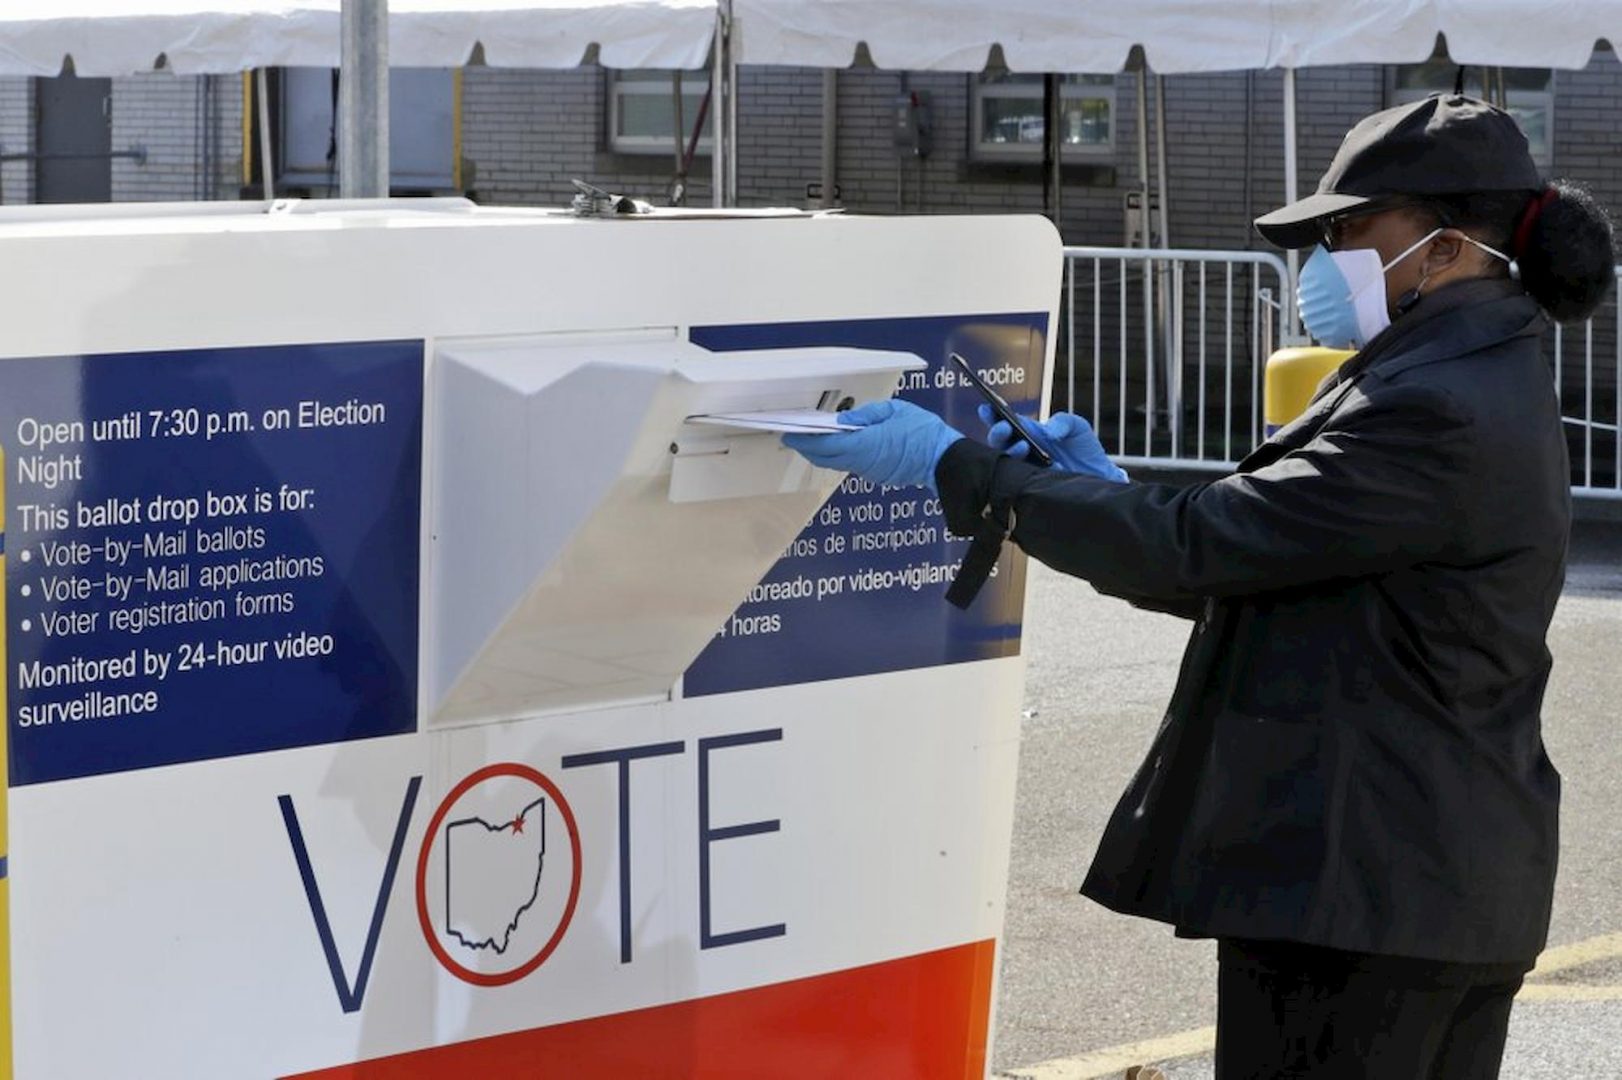 Marcia McCoy drops her ballot into a box outside the Cuyahoga County Board of Elections in Cleveland, Ohio, Tuesday. The first major test of an almost completely vote-by-mail election during a pandemic is unfolding in Ohio, offering lessons to other states about how to conduct one of the most basic acts of democracy amid a health crisis. 